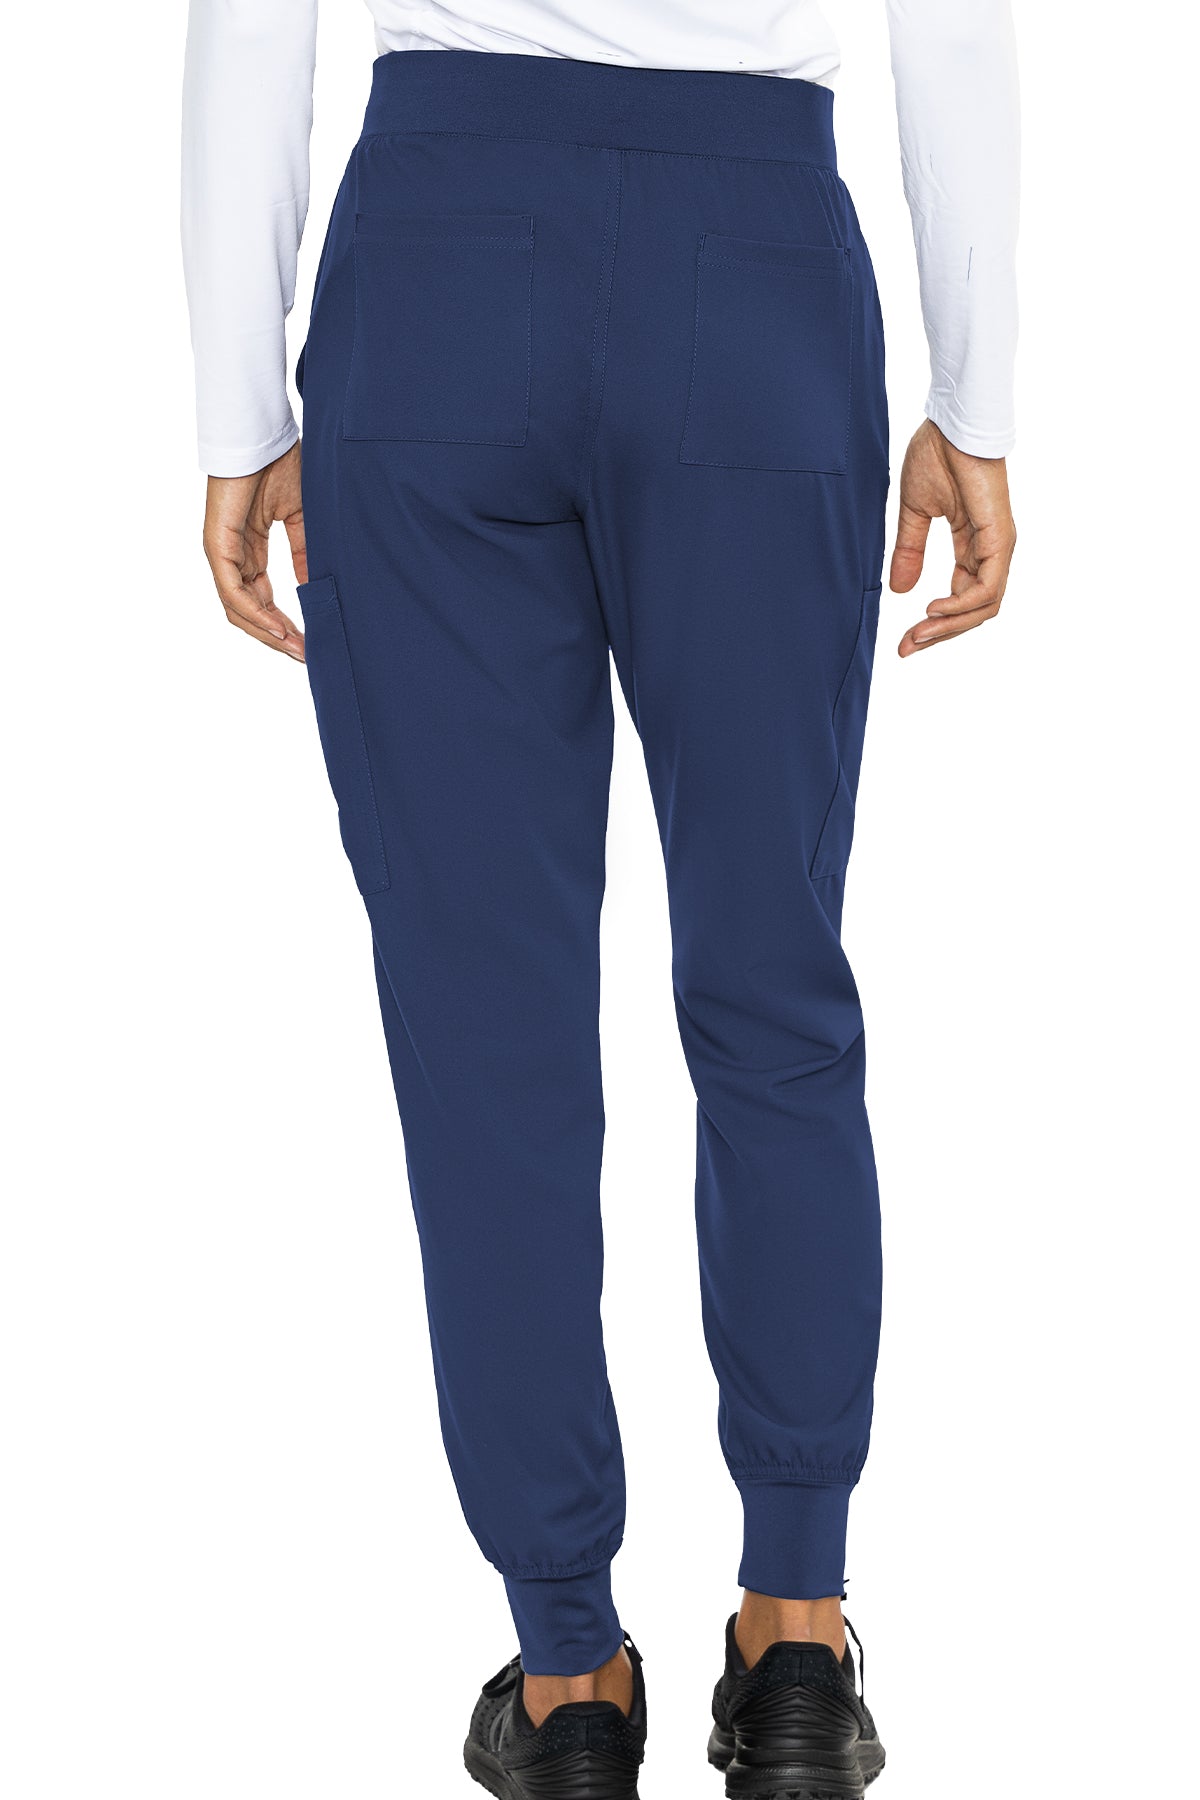 7710P Petite Med Couture Touch Performance Jogger Yoga Pant 